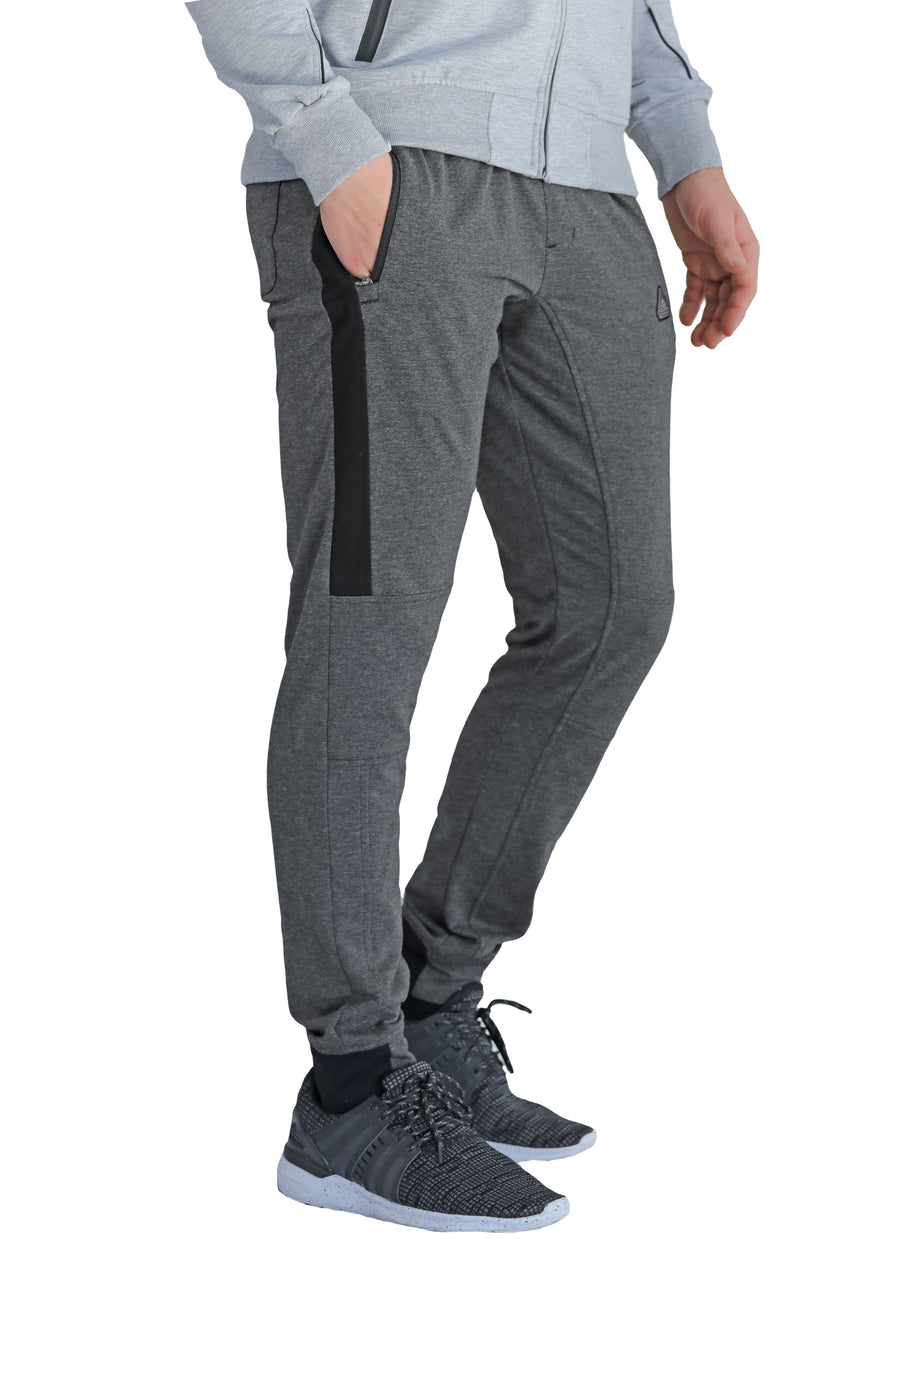 SCR SPORTSWEAR Men's All Day Comfort Tappered Slim Sweatpants  Athletic-Casual Lounge Pants Mens Running Joggers for Men (31W x 30L, Light  Grey